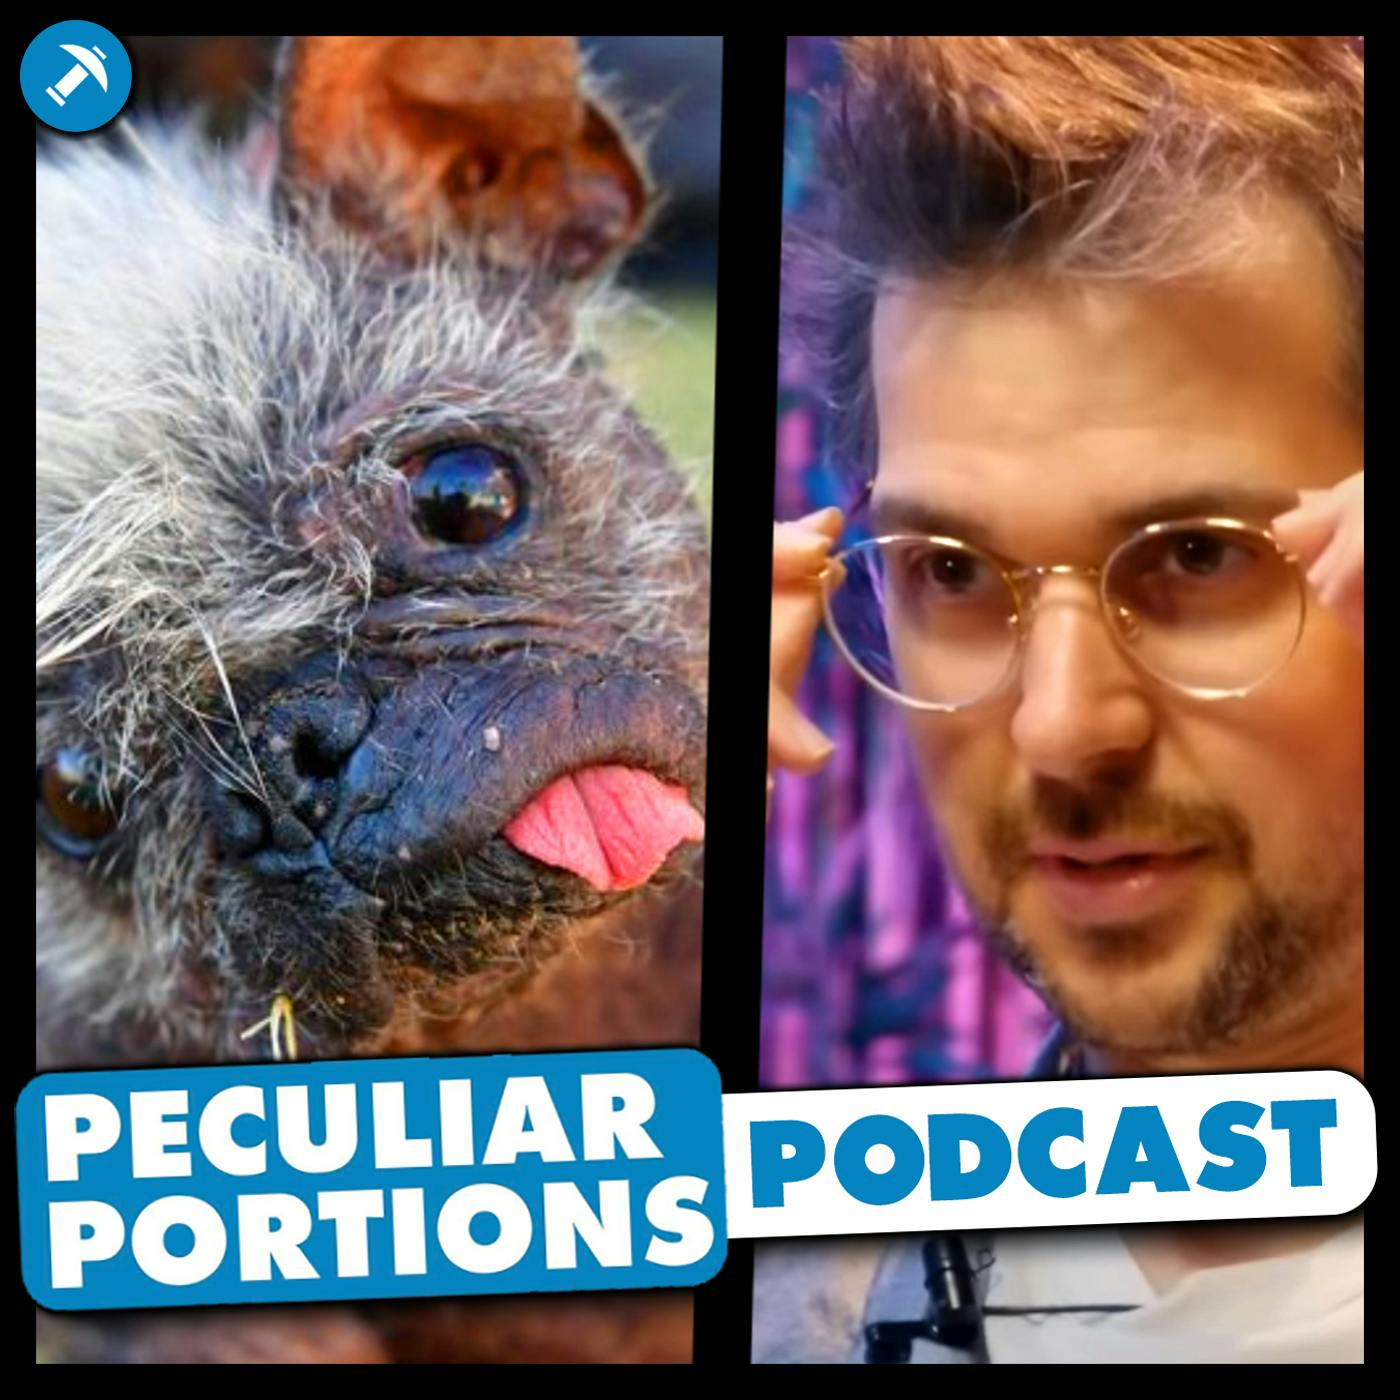 Mr. Happy Face, World's Ugliest Dog - Peculiar Portions Podcast #61